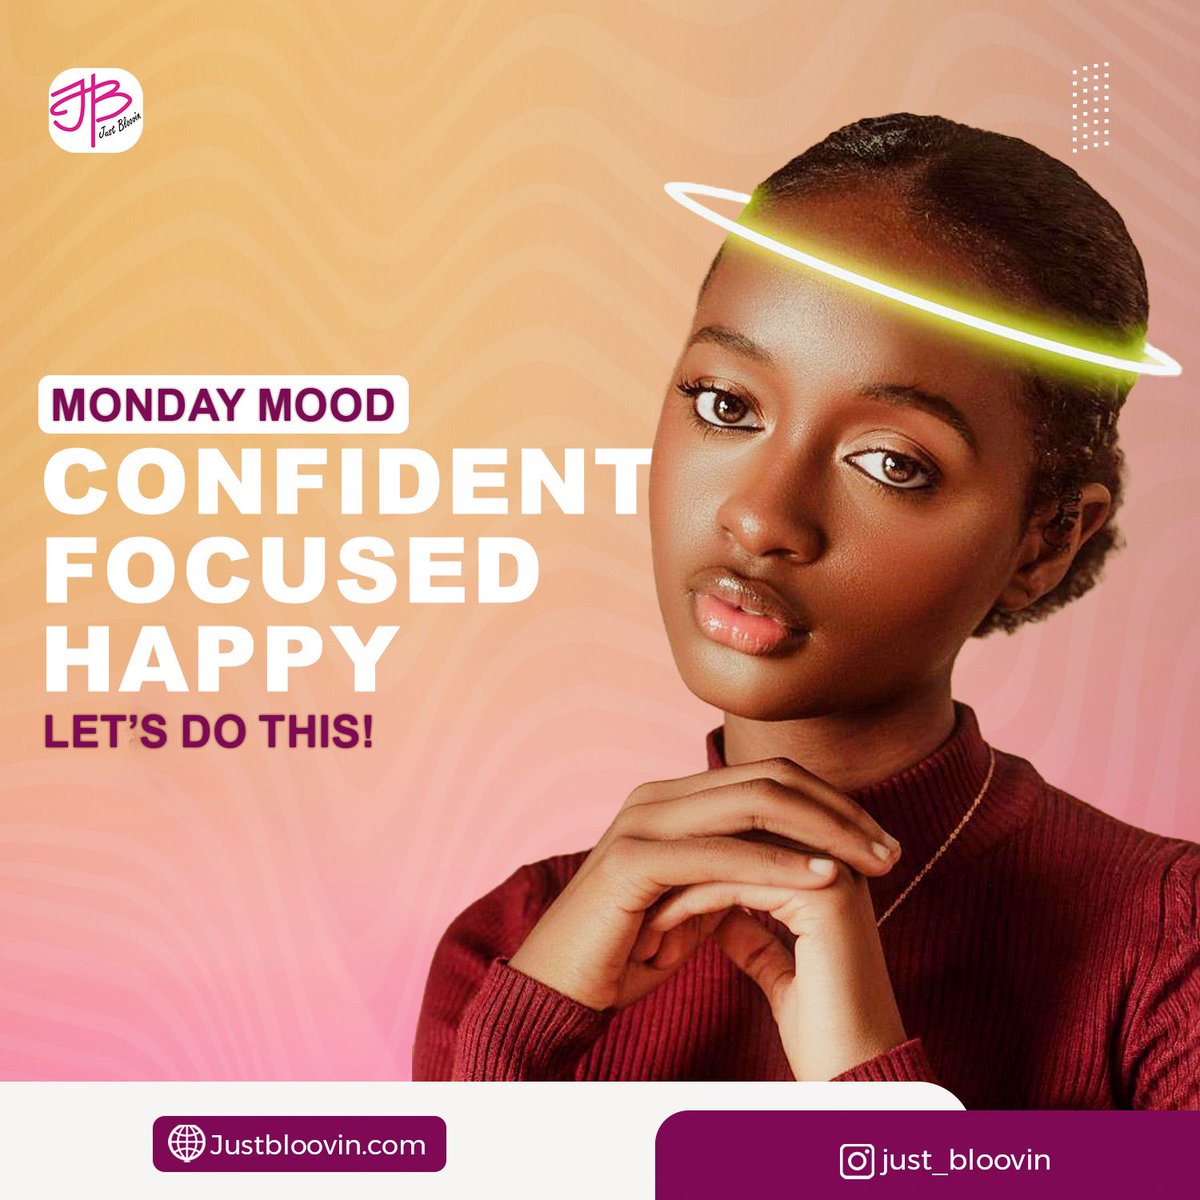 It’s a new week.

Let your mood for today be Confidence, Happiness and lastly, Be Focused.

#justbloovin #ibloov #mondaymood #newweek #silentdiscoheadset #360camera #photobooth